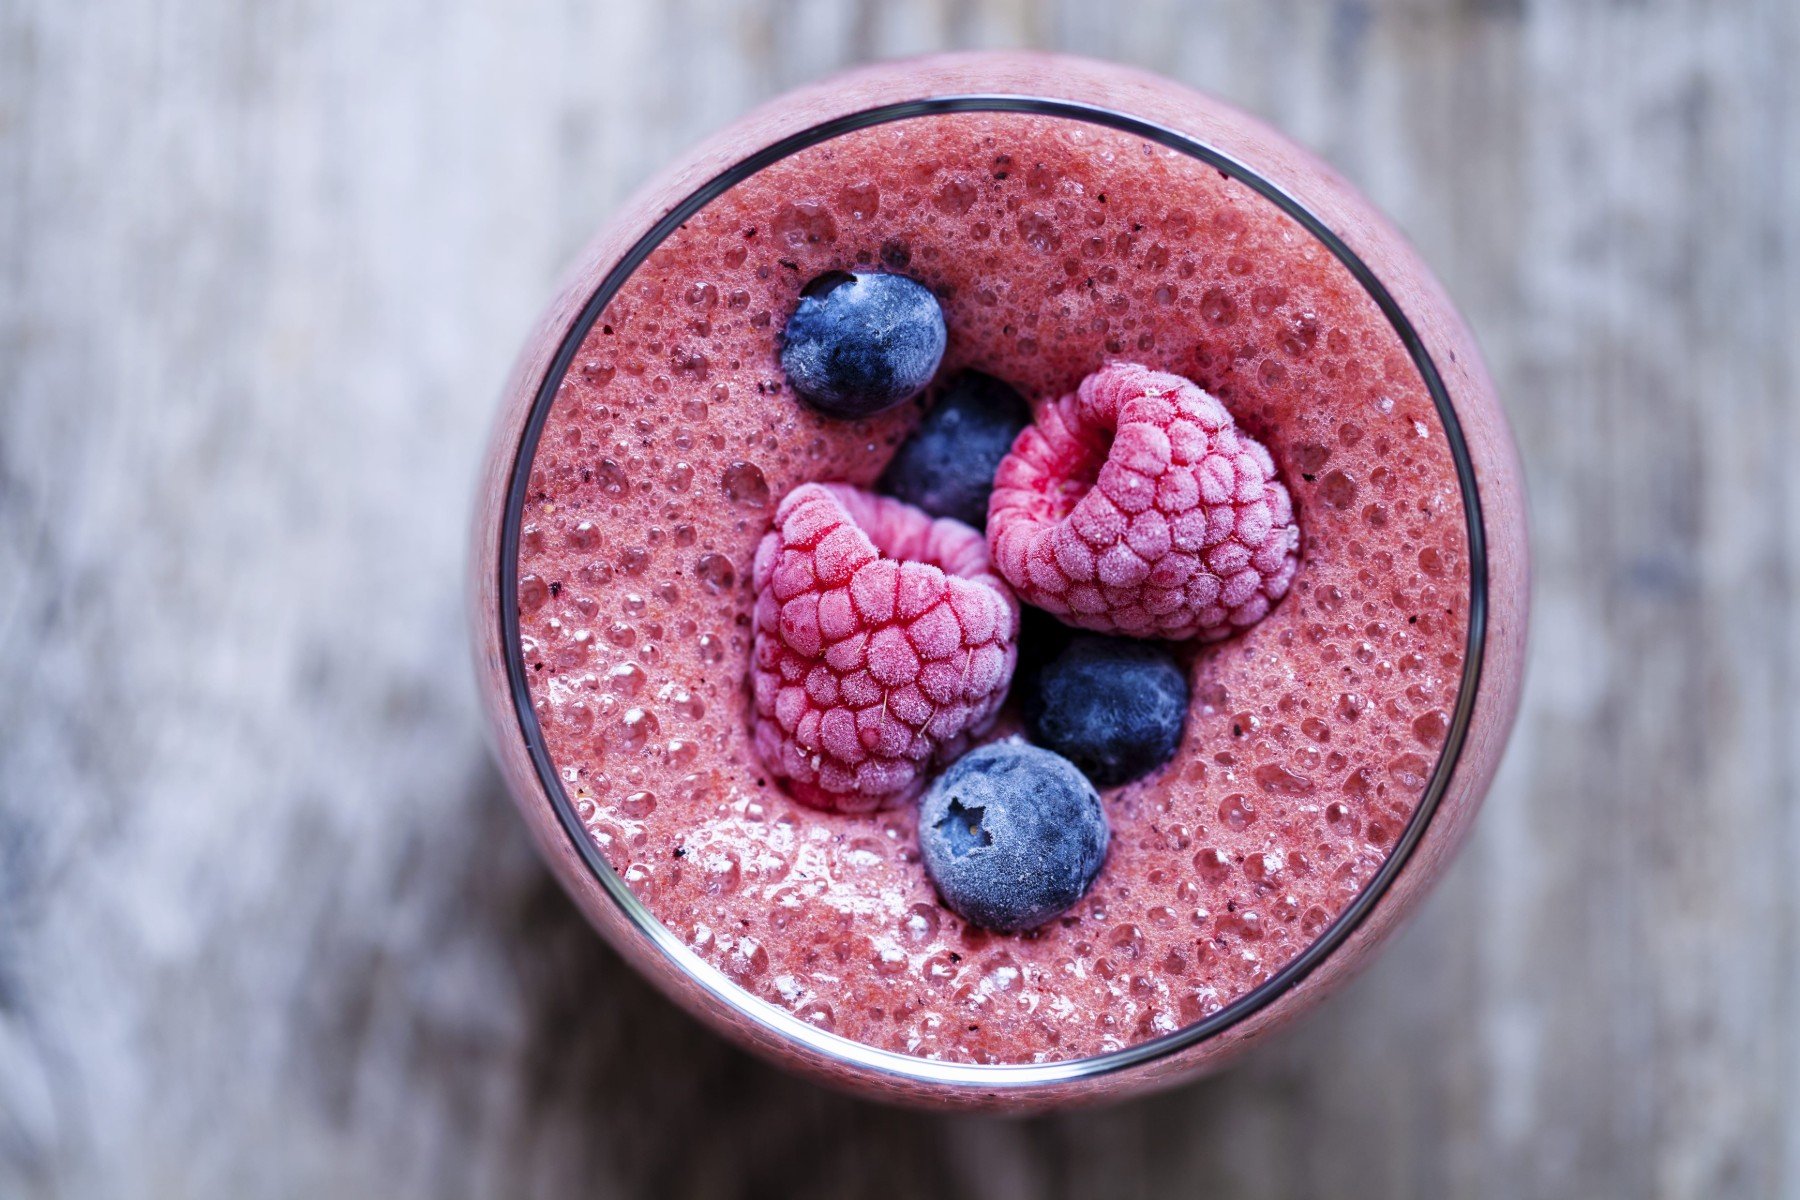 Get Fruity With Your Creatine | Super-Tasty Smoothie Recipe